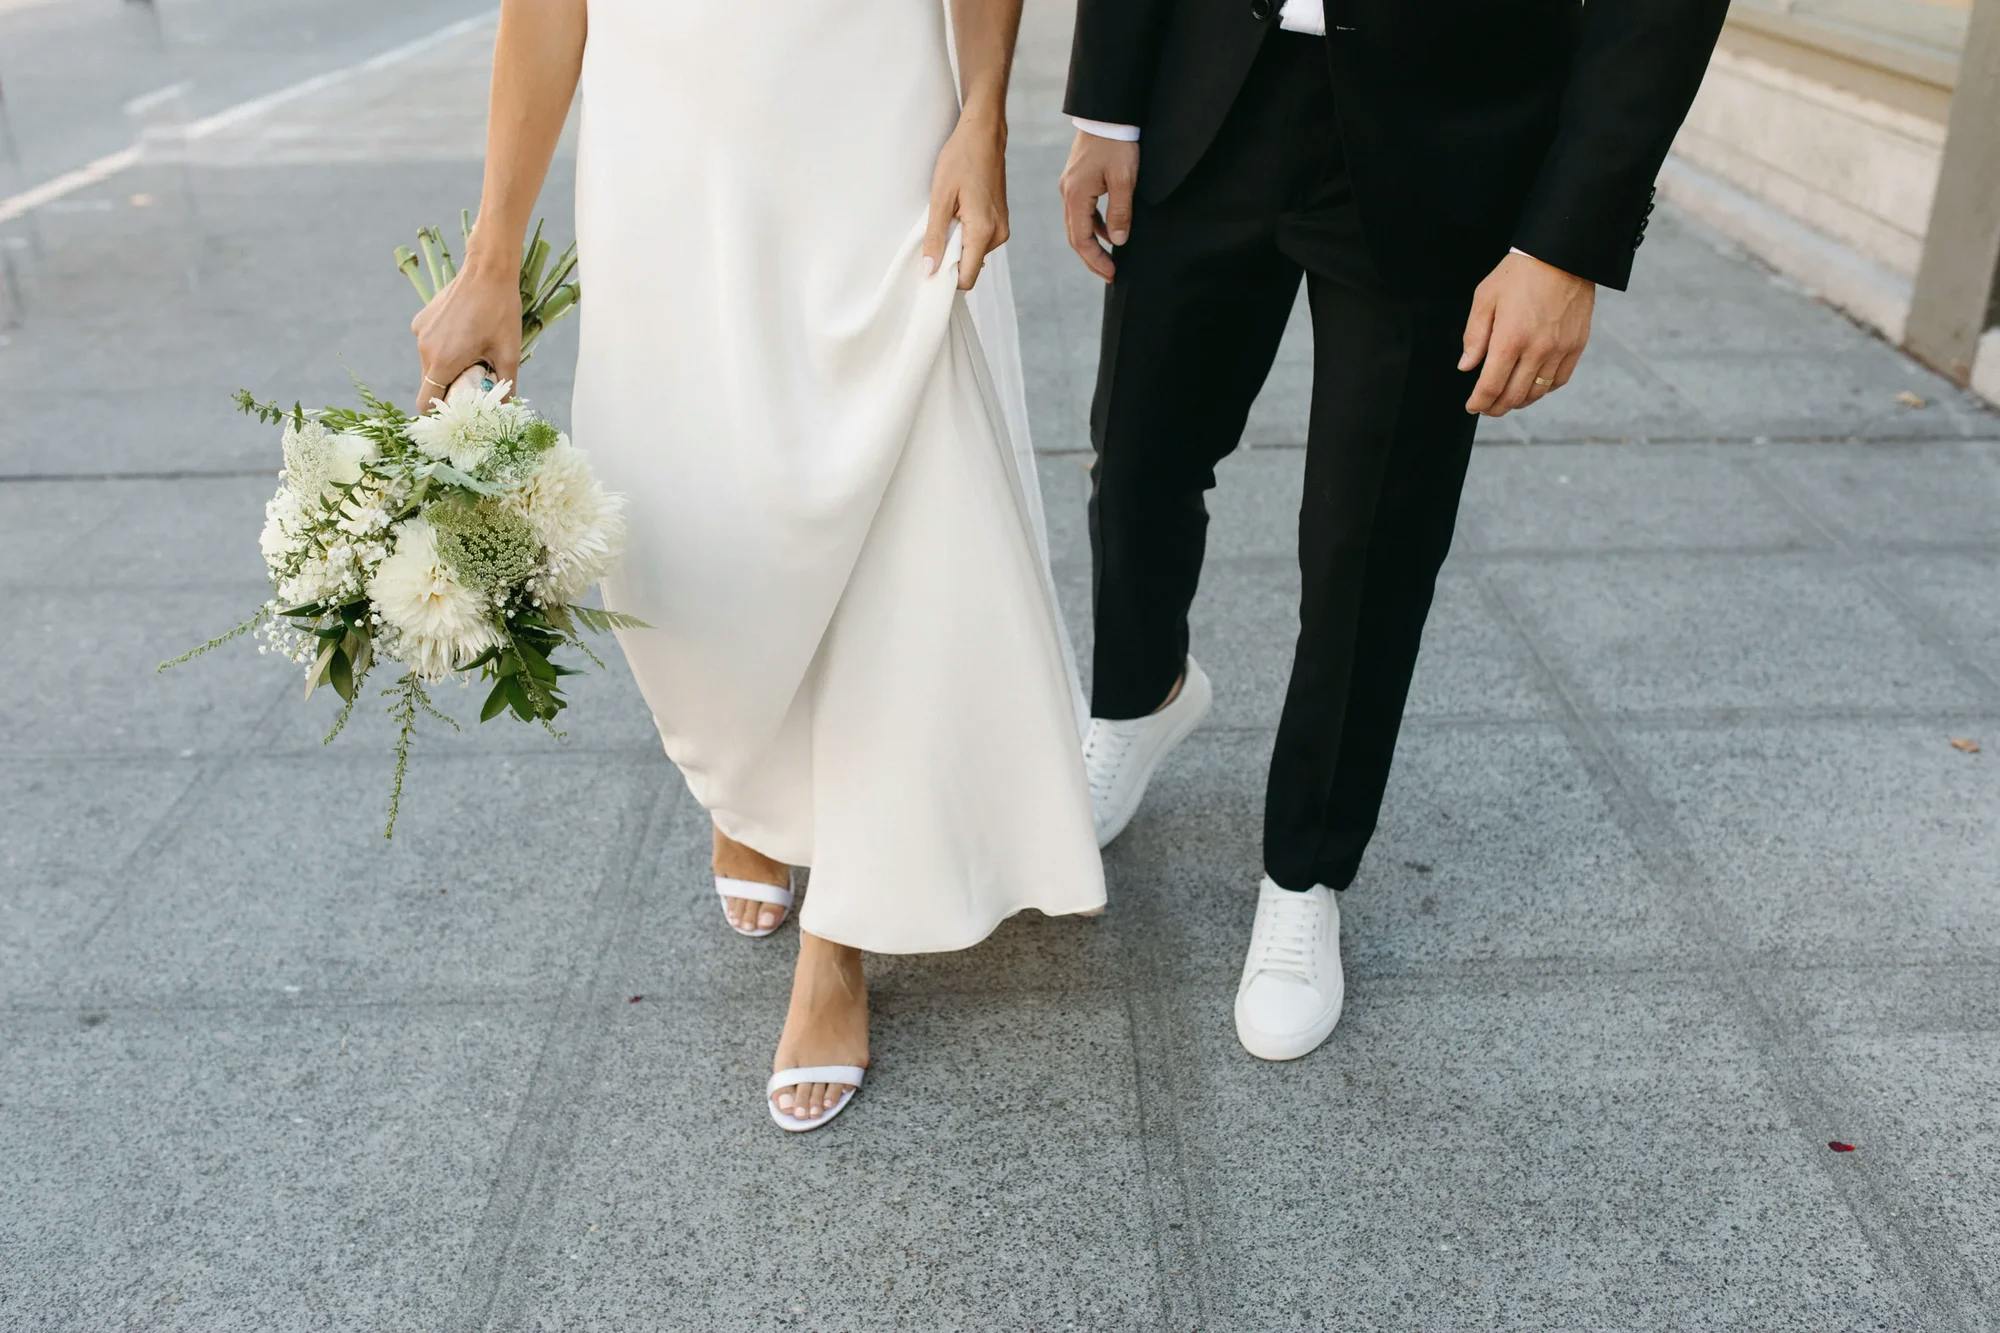 Bride and groom walking with wedding bouquet.